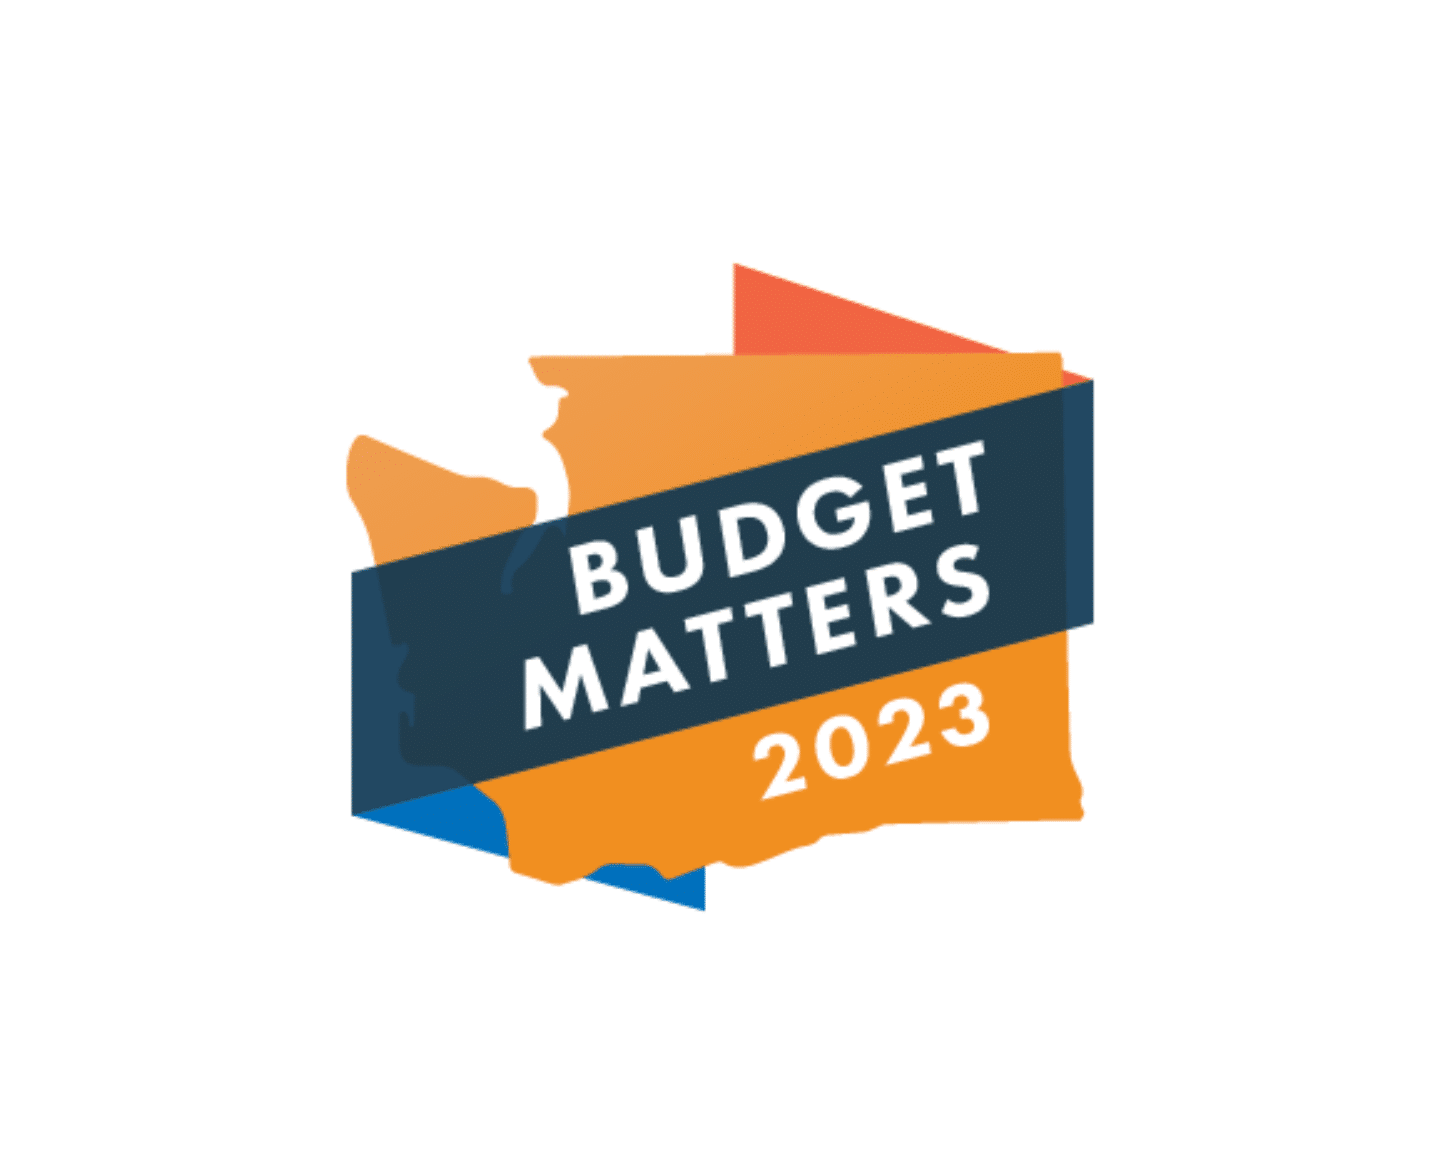 Clicking link opens home page for budget matters